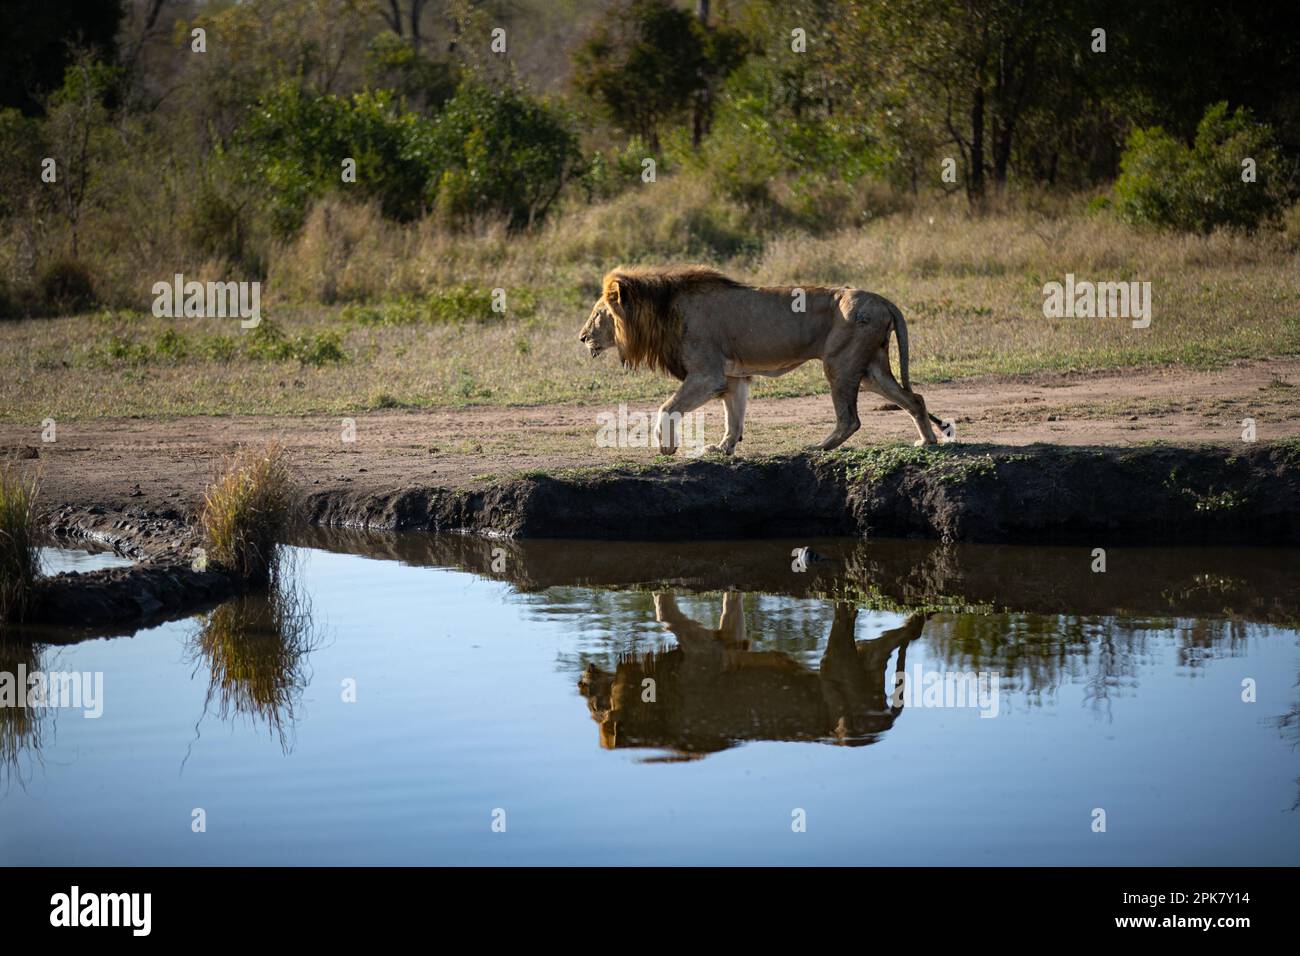 A male lion, Panthera leo, walking next to a dam, reflection in water. Stock Photo